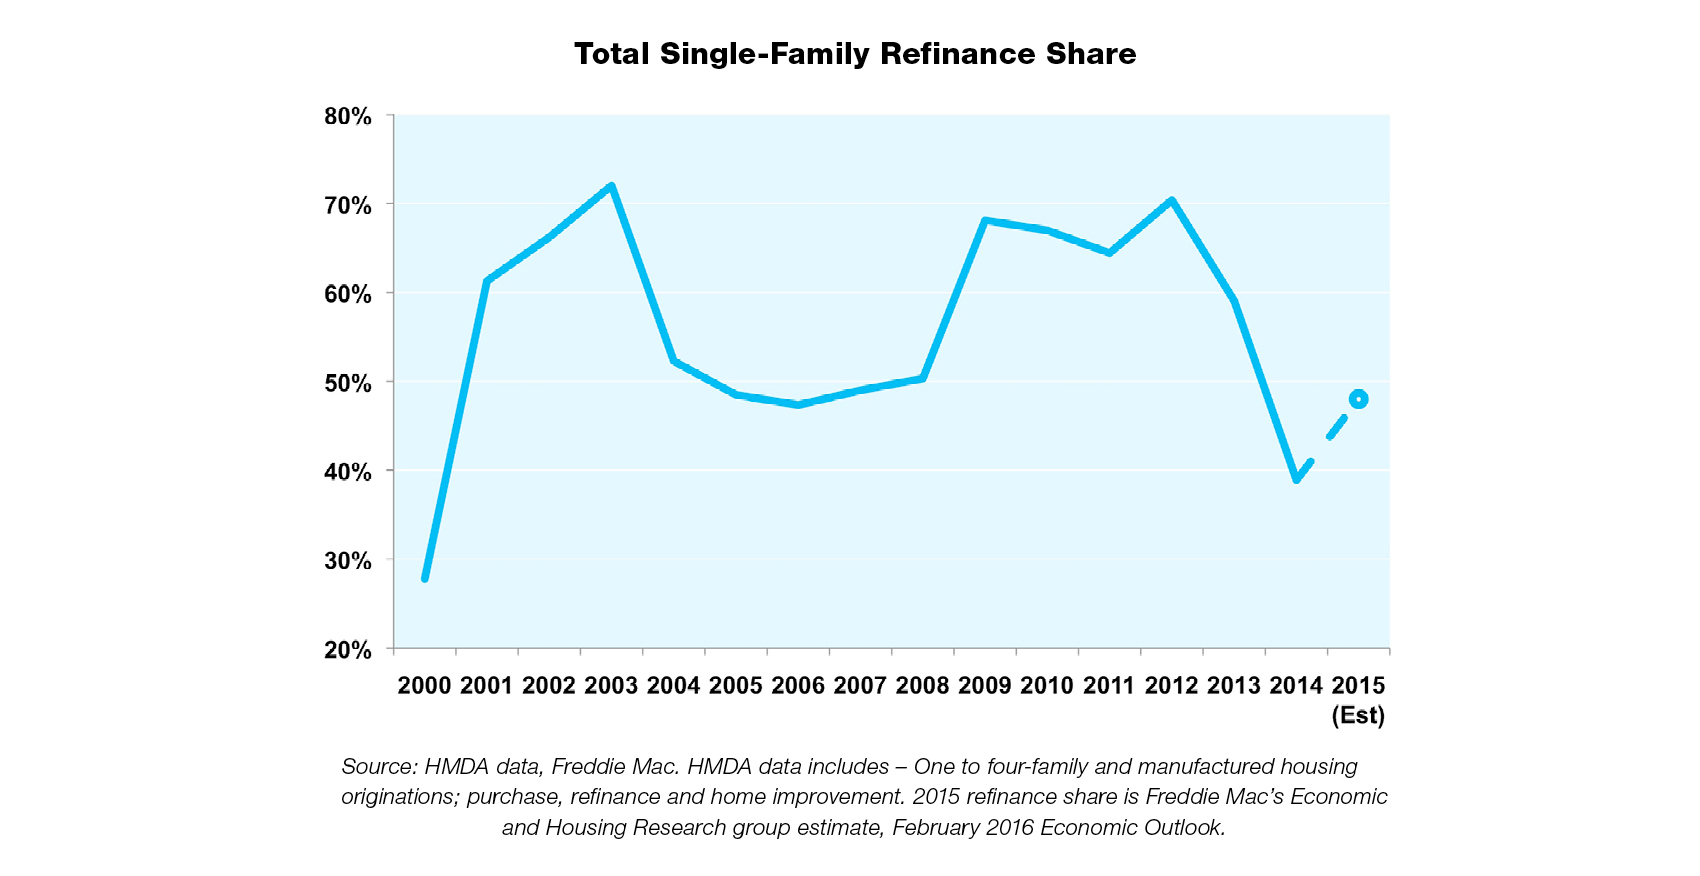 Line graph showing total single-family refinance share from 2000 to 2015